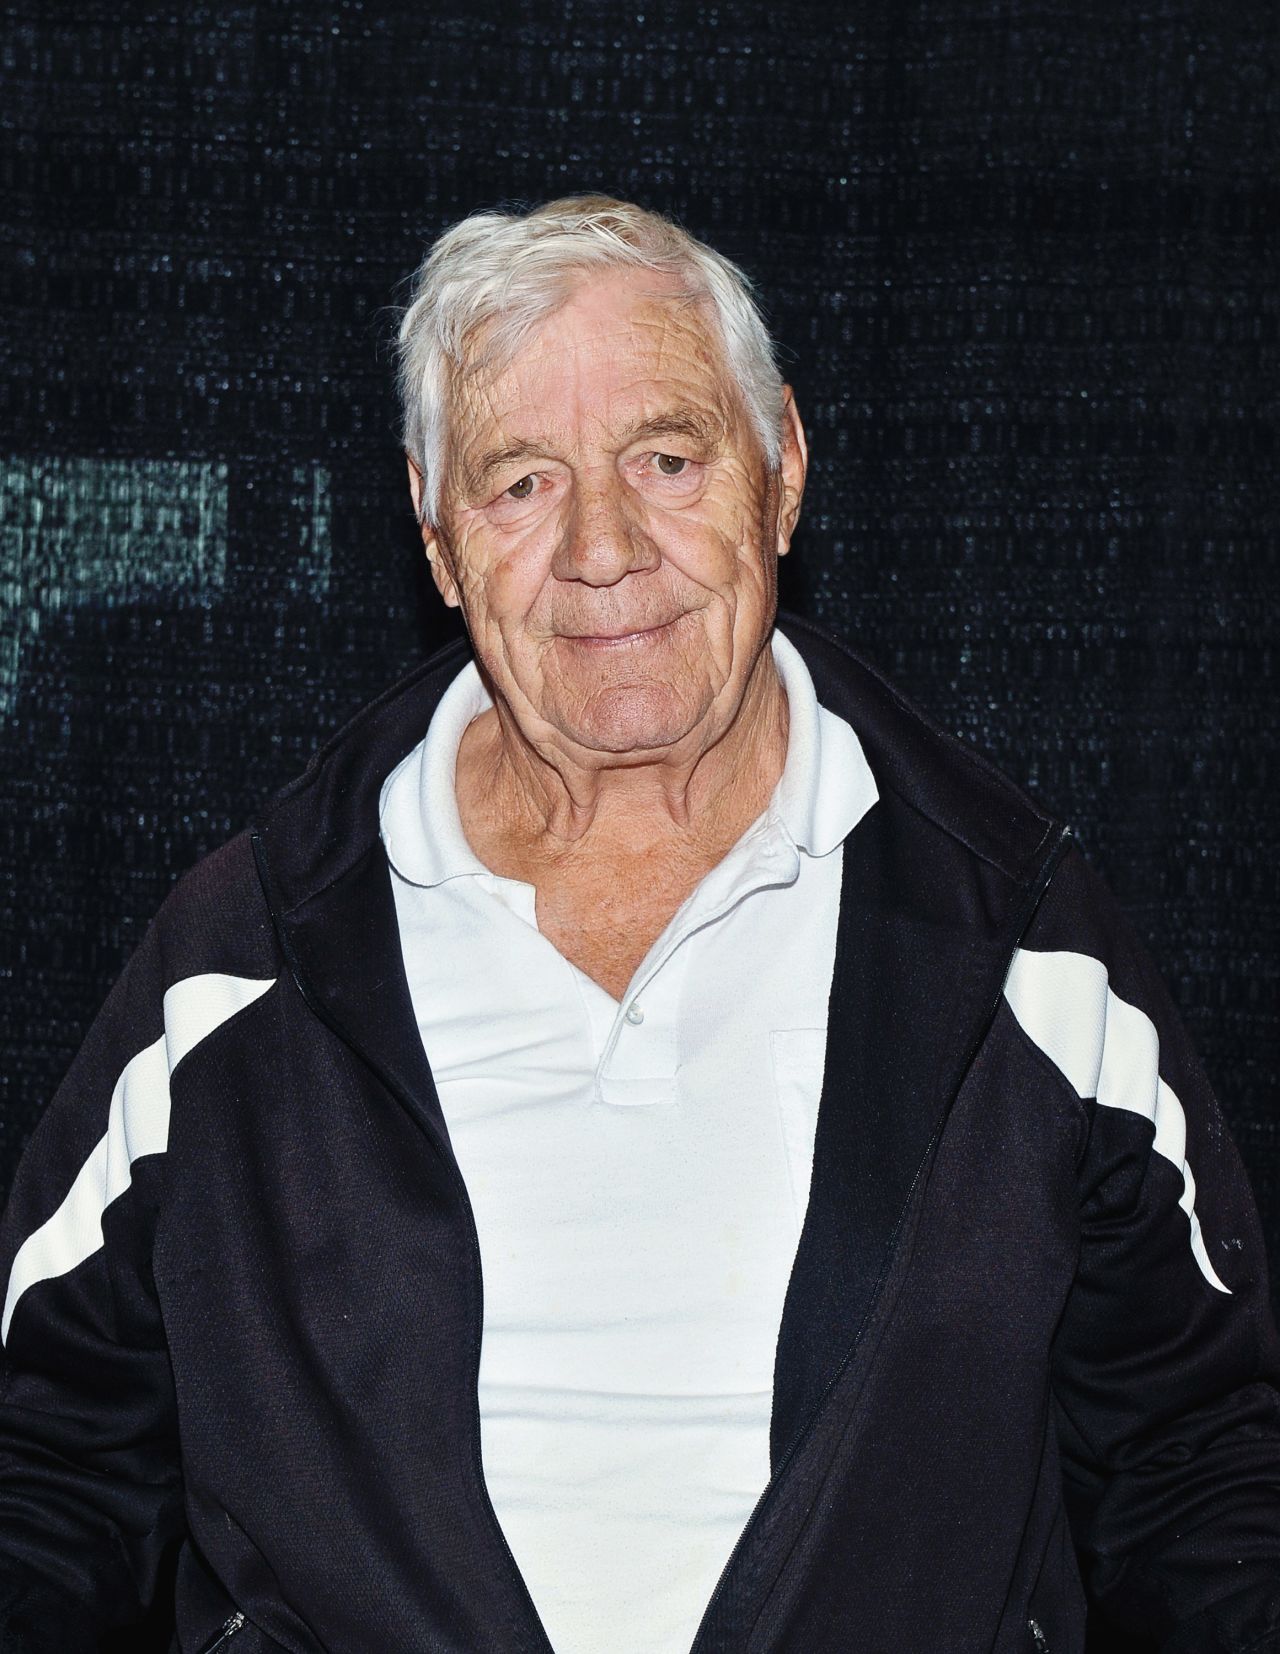 Pro wrestling trailblazer <a href="https://www.cnn.com/2020/12/02/entertainment/pat-patterson-wwe-death-trnd/index.html" target="_blank">Pat Patterson</a> died on December 2 at the age of 79, World Wrestling Entertainment announced. Patterson, who began his career in 1958, was the first openly gay wrestling star. He continued to work for WWE after retiring from the ring.